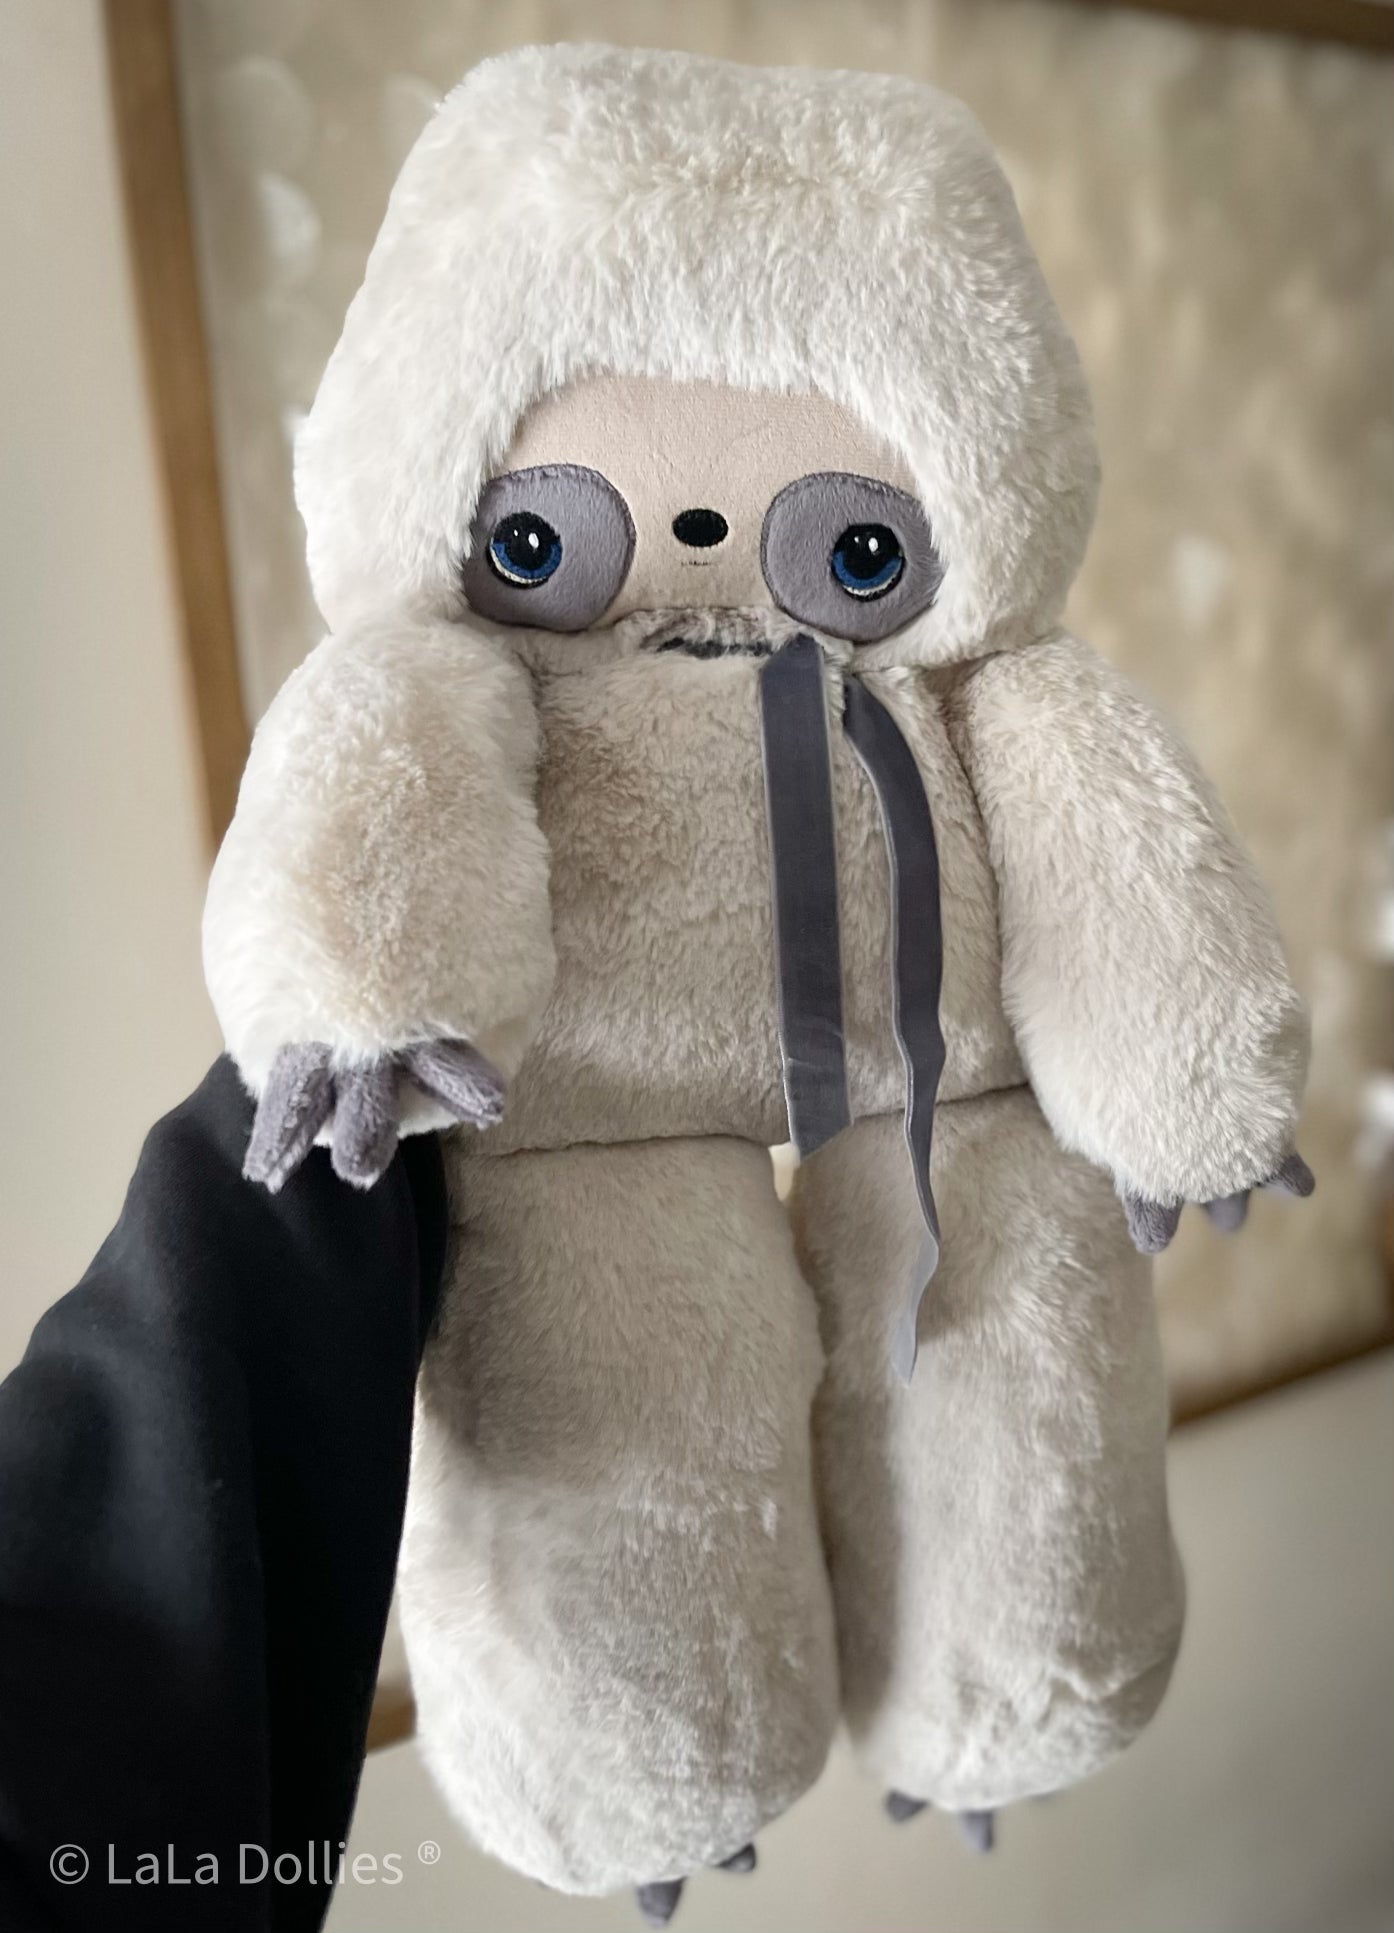 Caesar the Sloth, Charcoal accents, with the Blue Eyes | Mama Ragged | LALA DOLLIES ®